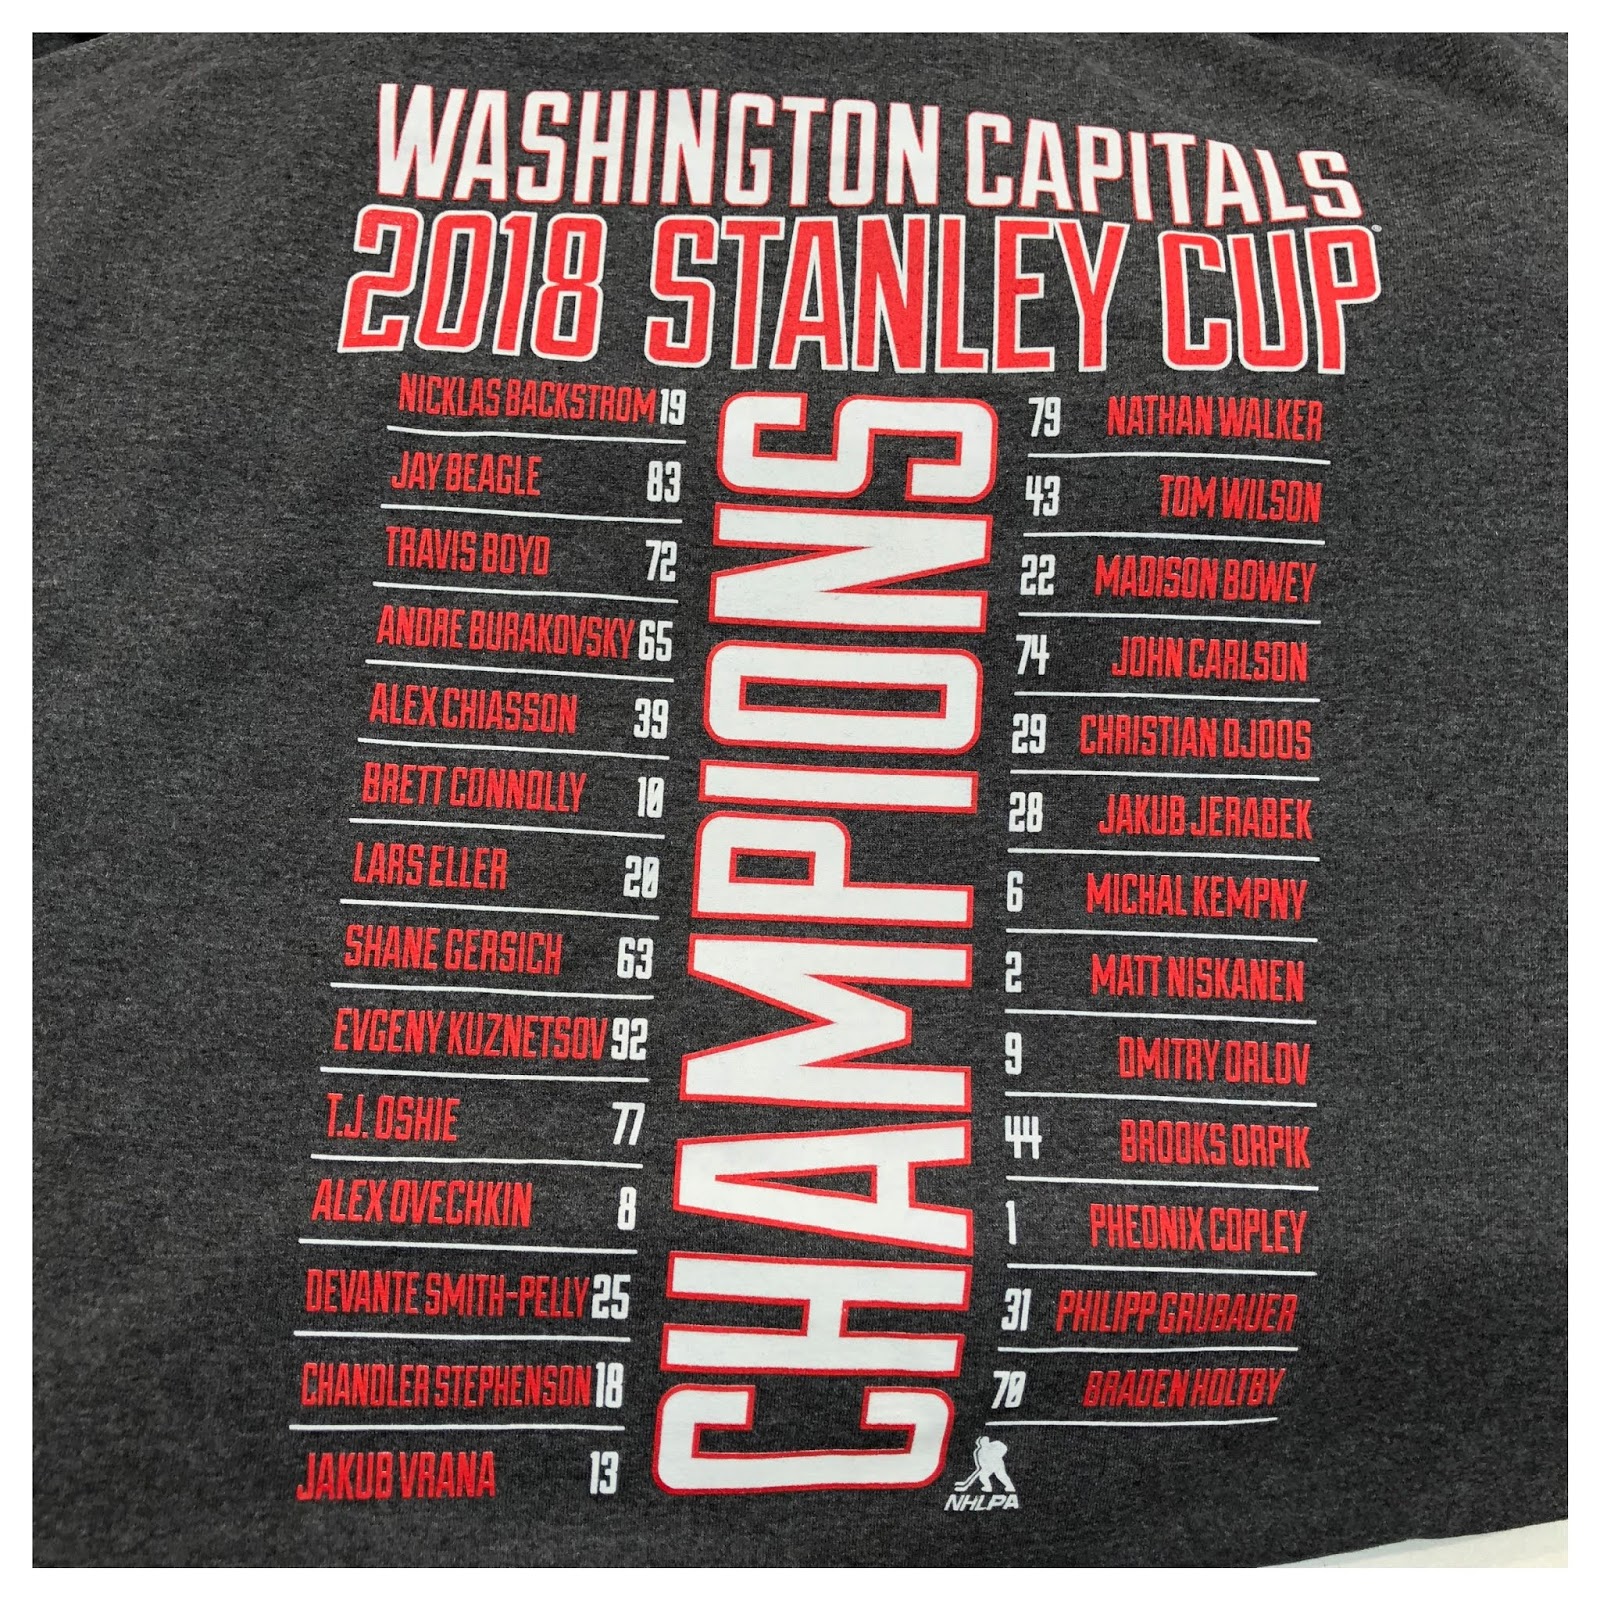 the Costco Connoisseur: Get Washington Capitals 2018 Stanley Cup  Championship Apparel at Costco!